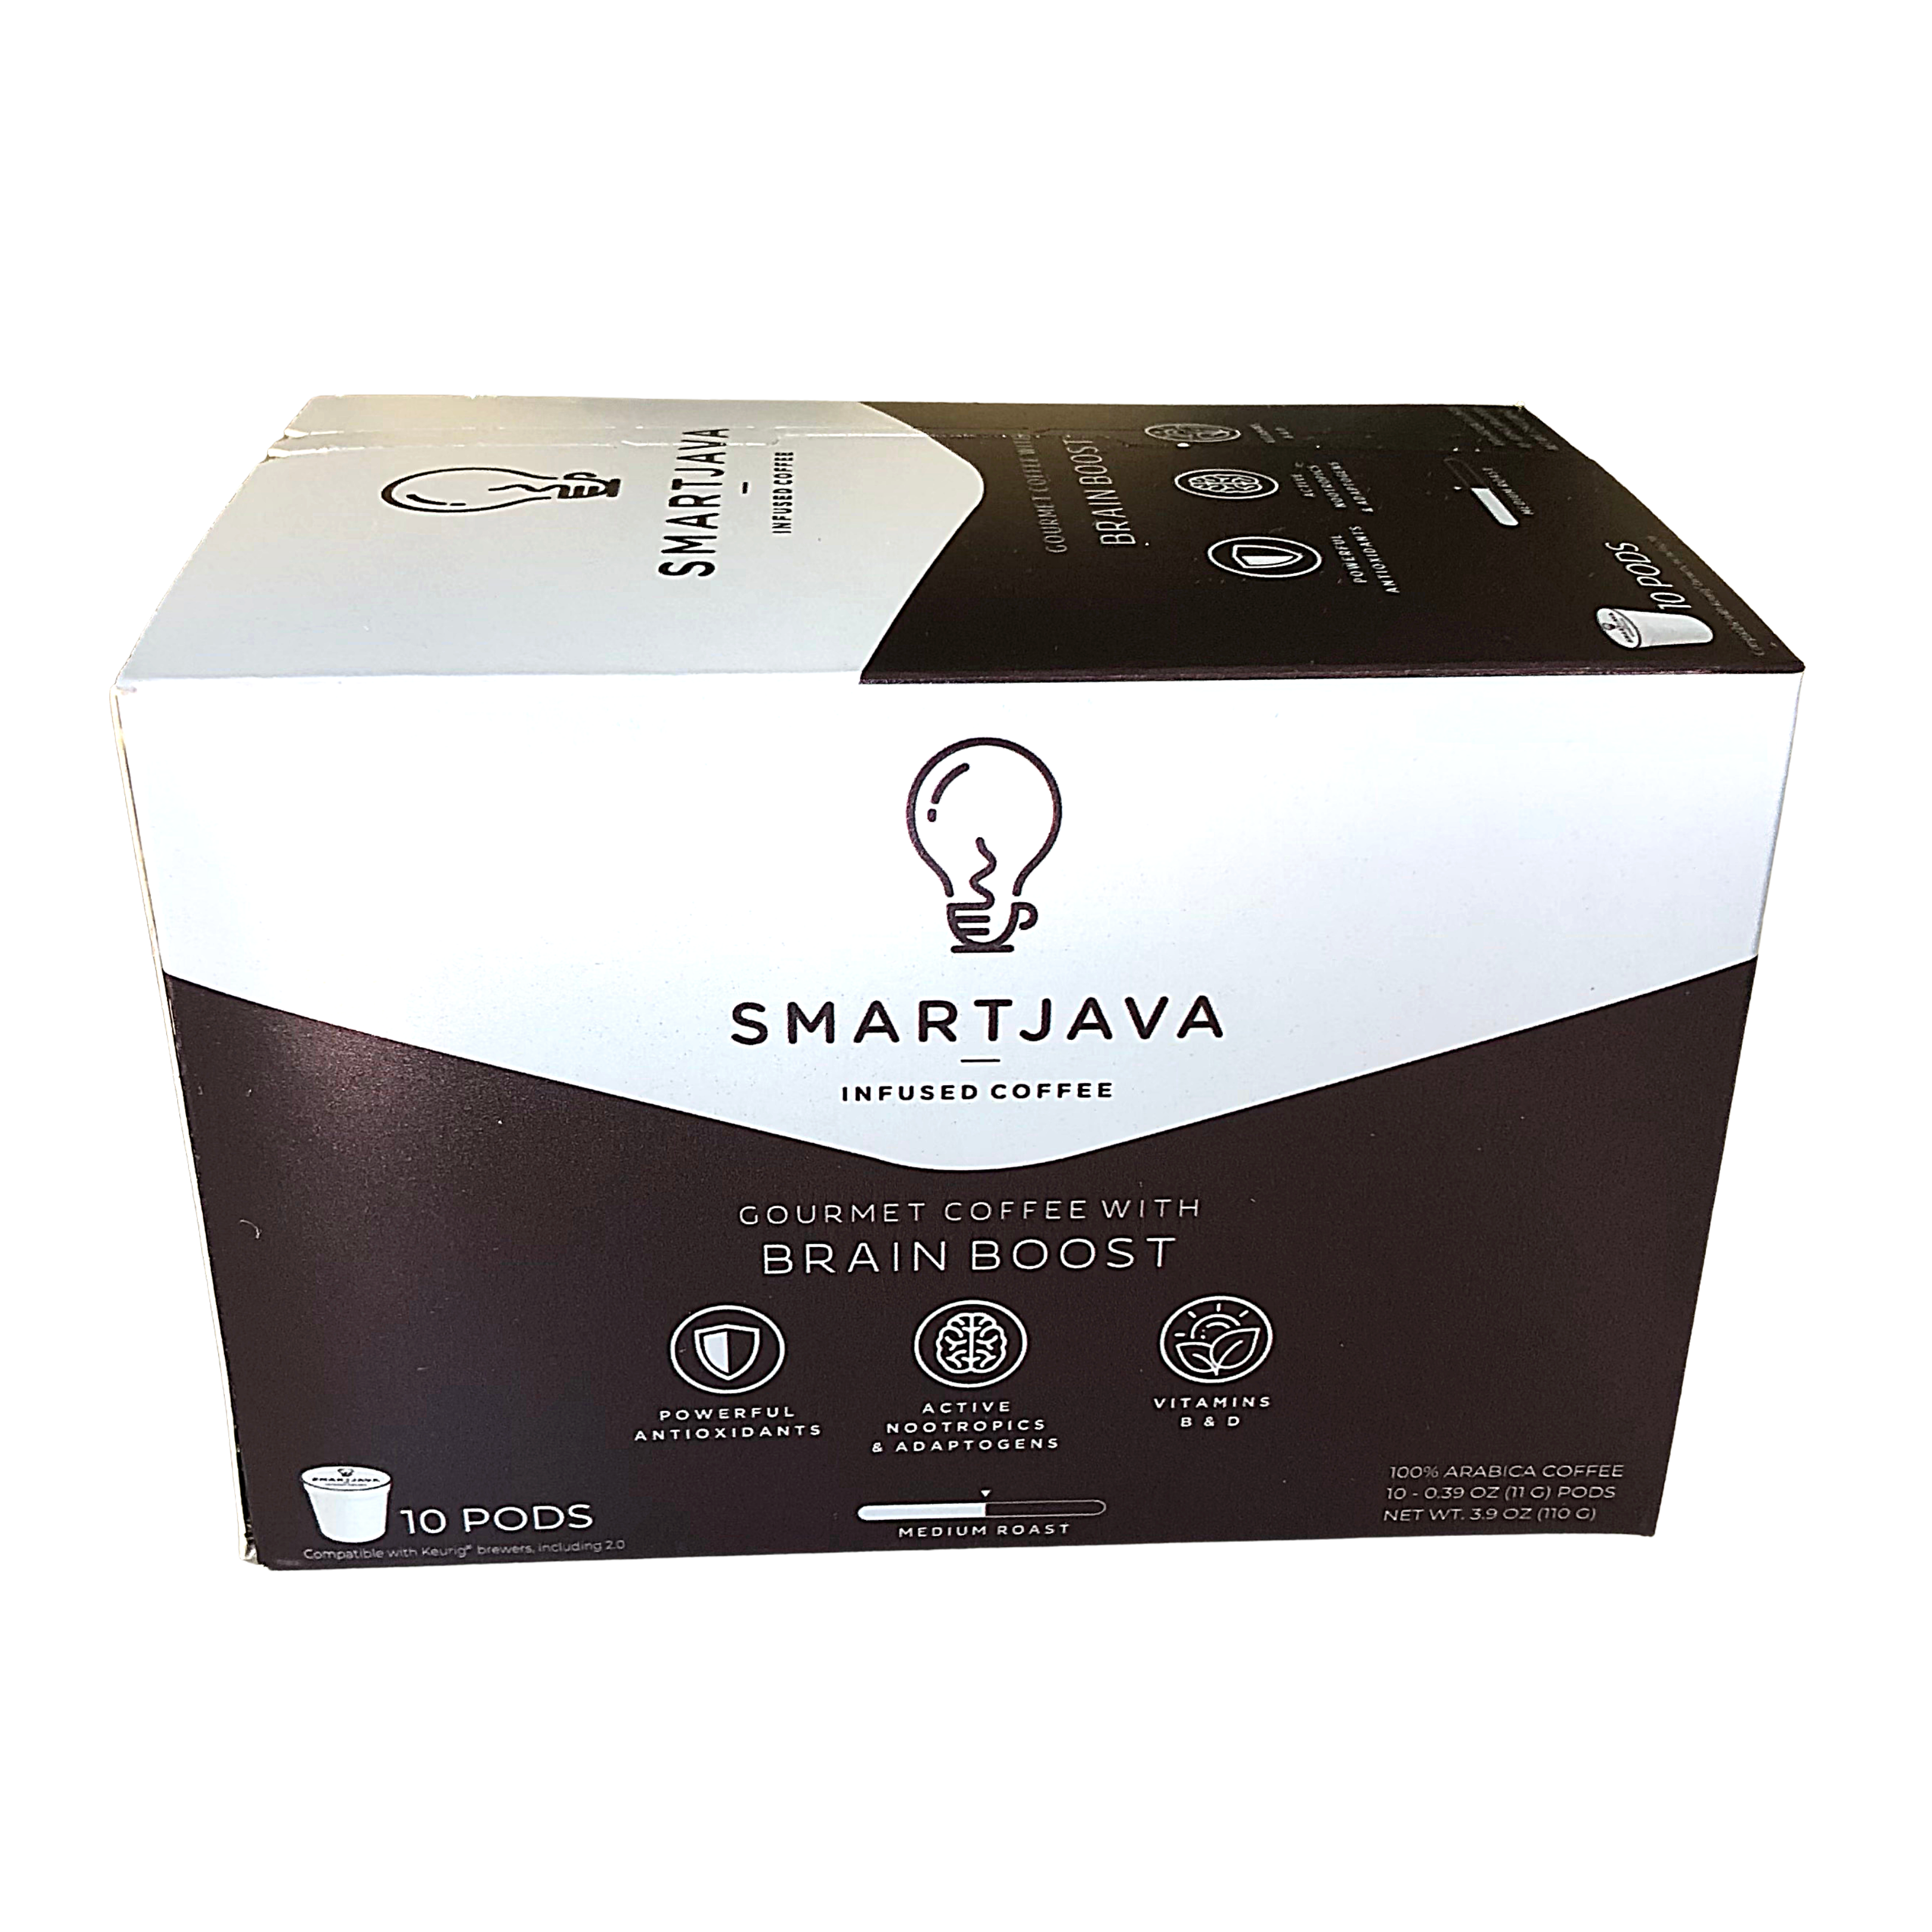 A box of SmartJava healthy coffee pods for Keurig coffee machines